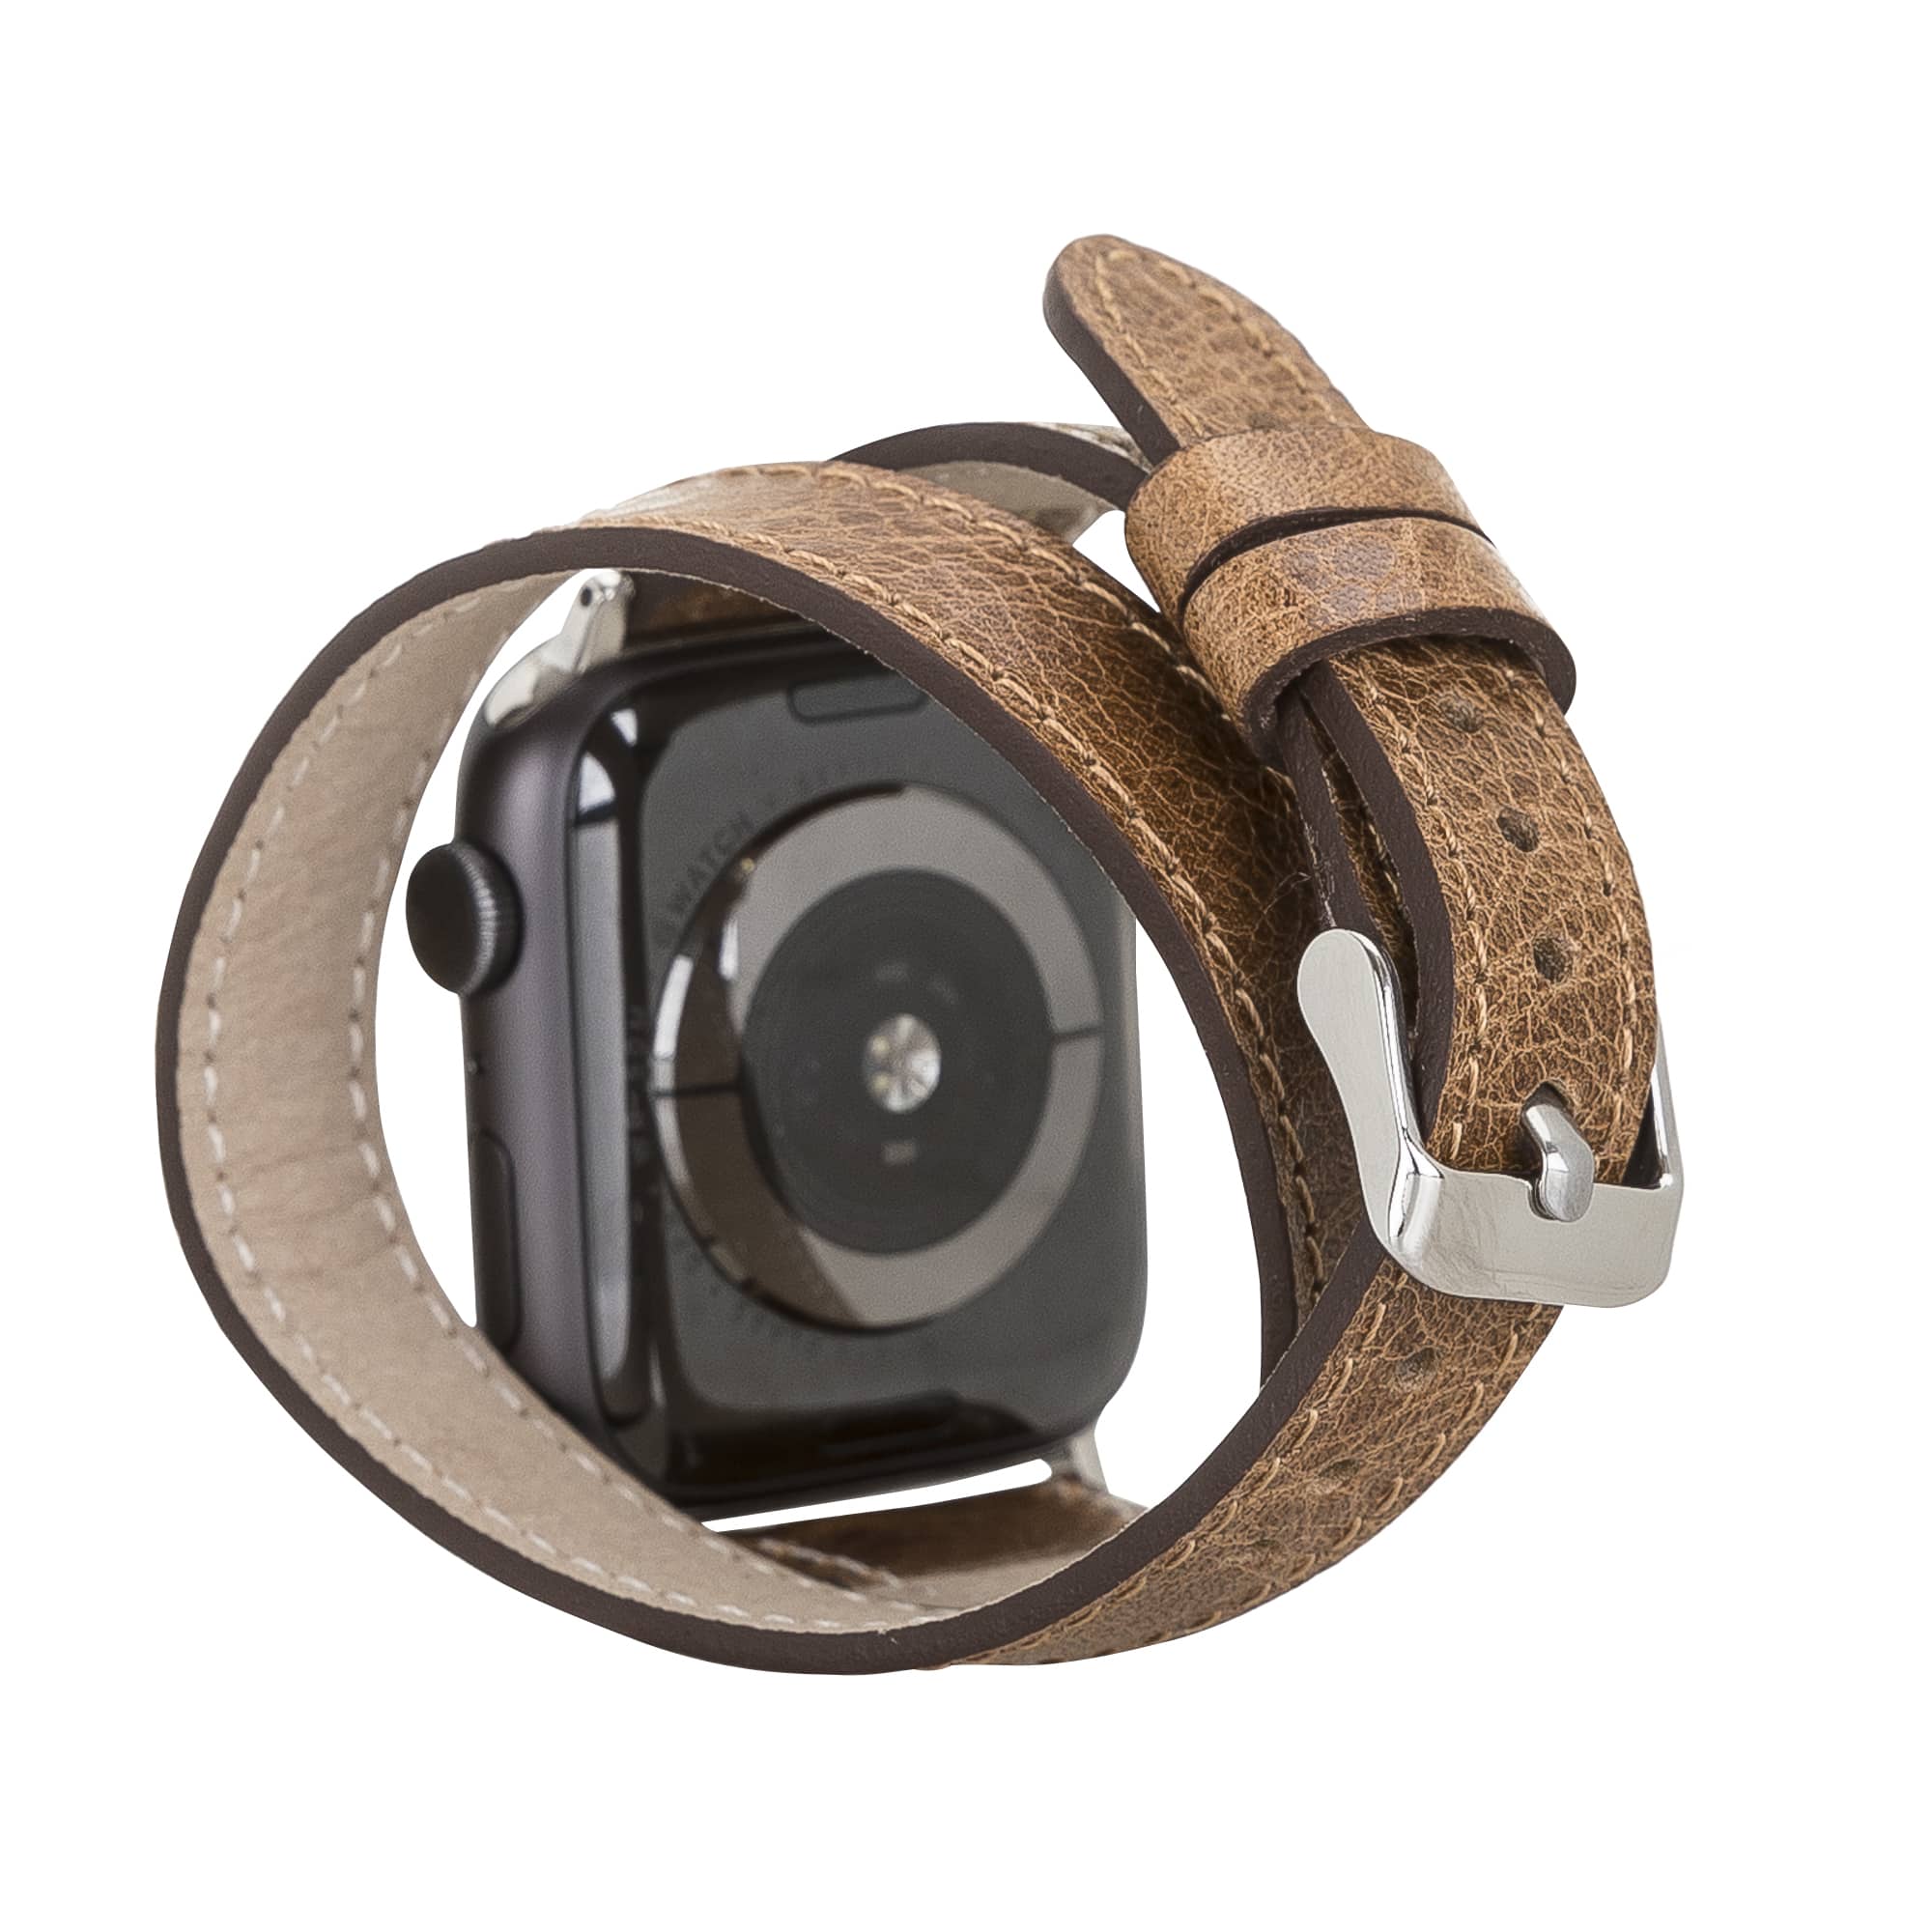 Newcastle Classic Brown Genuine Leather Apple Watch Band Strap 38mm 40mm 42mm 44mm 45mm for All Series - Bomonti - 2